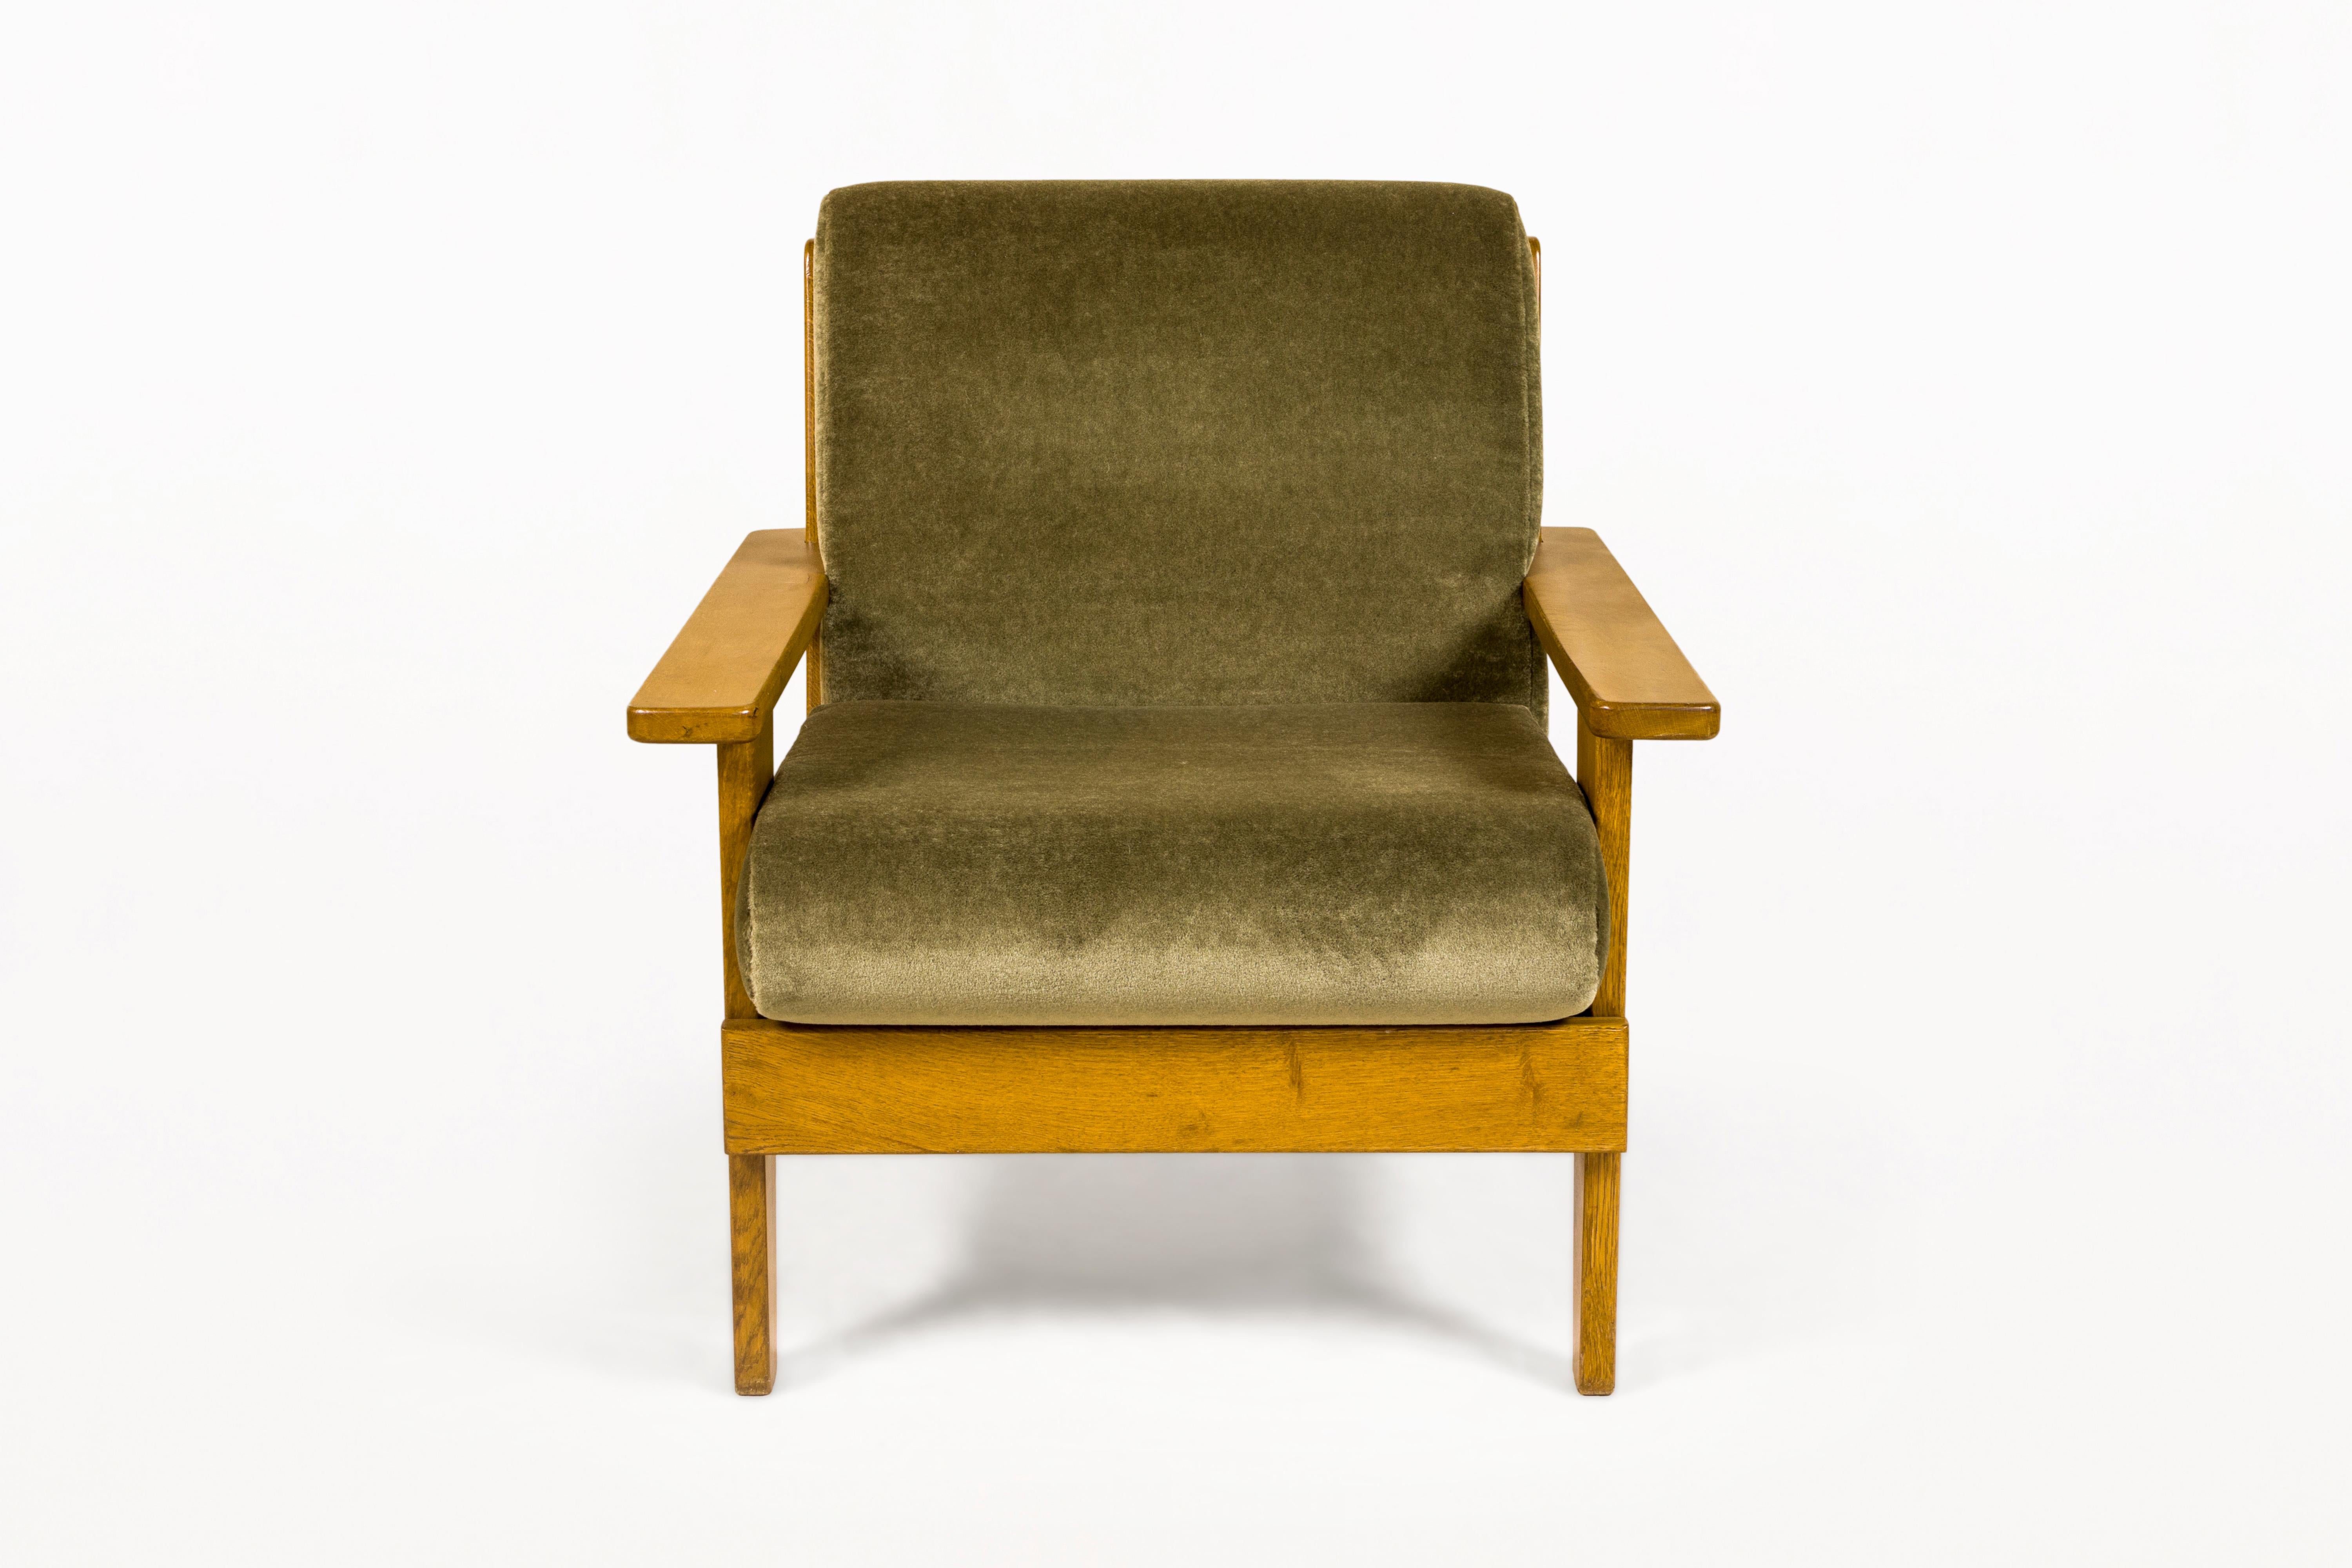 Pair of Mid-Century Armchairs
Made with elm.
Veery decorative.
Newly reupholstered with a Pierre Frey Mohair fabric.
Circa 1960, France.
Very good vintage condition.
Mid-Century Modern (MCM) is a design movement in interior, product, graphic design,